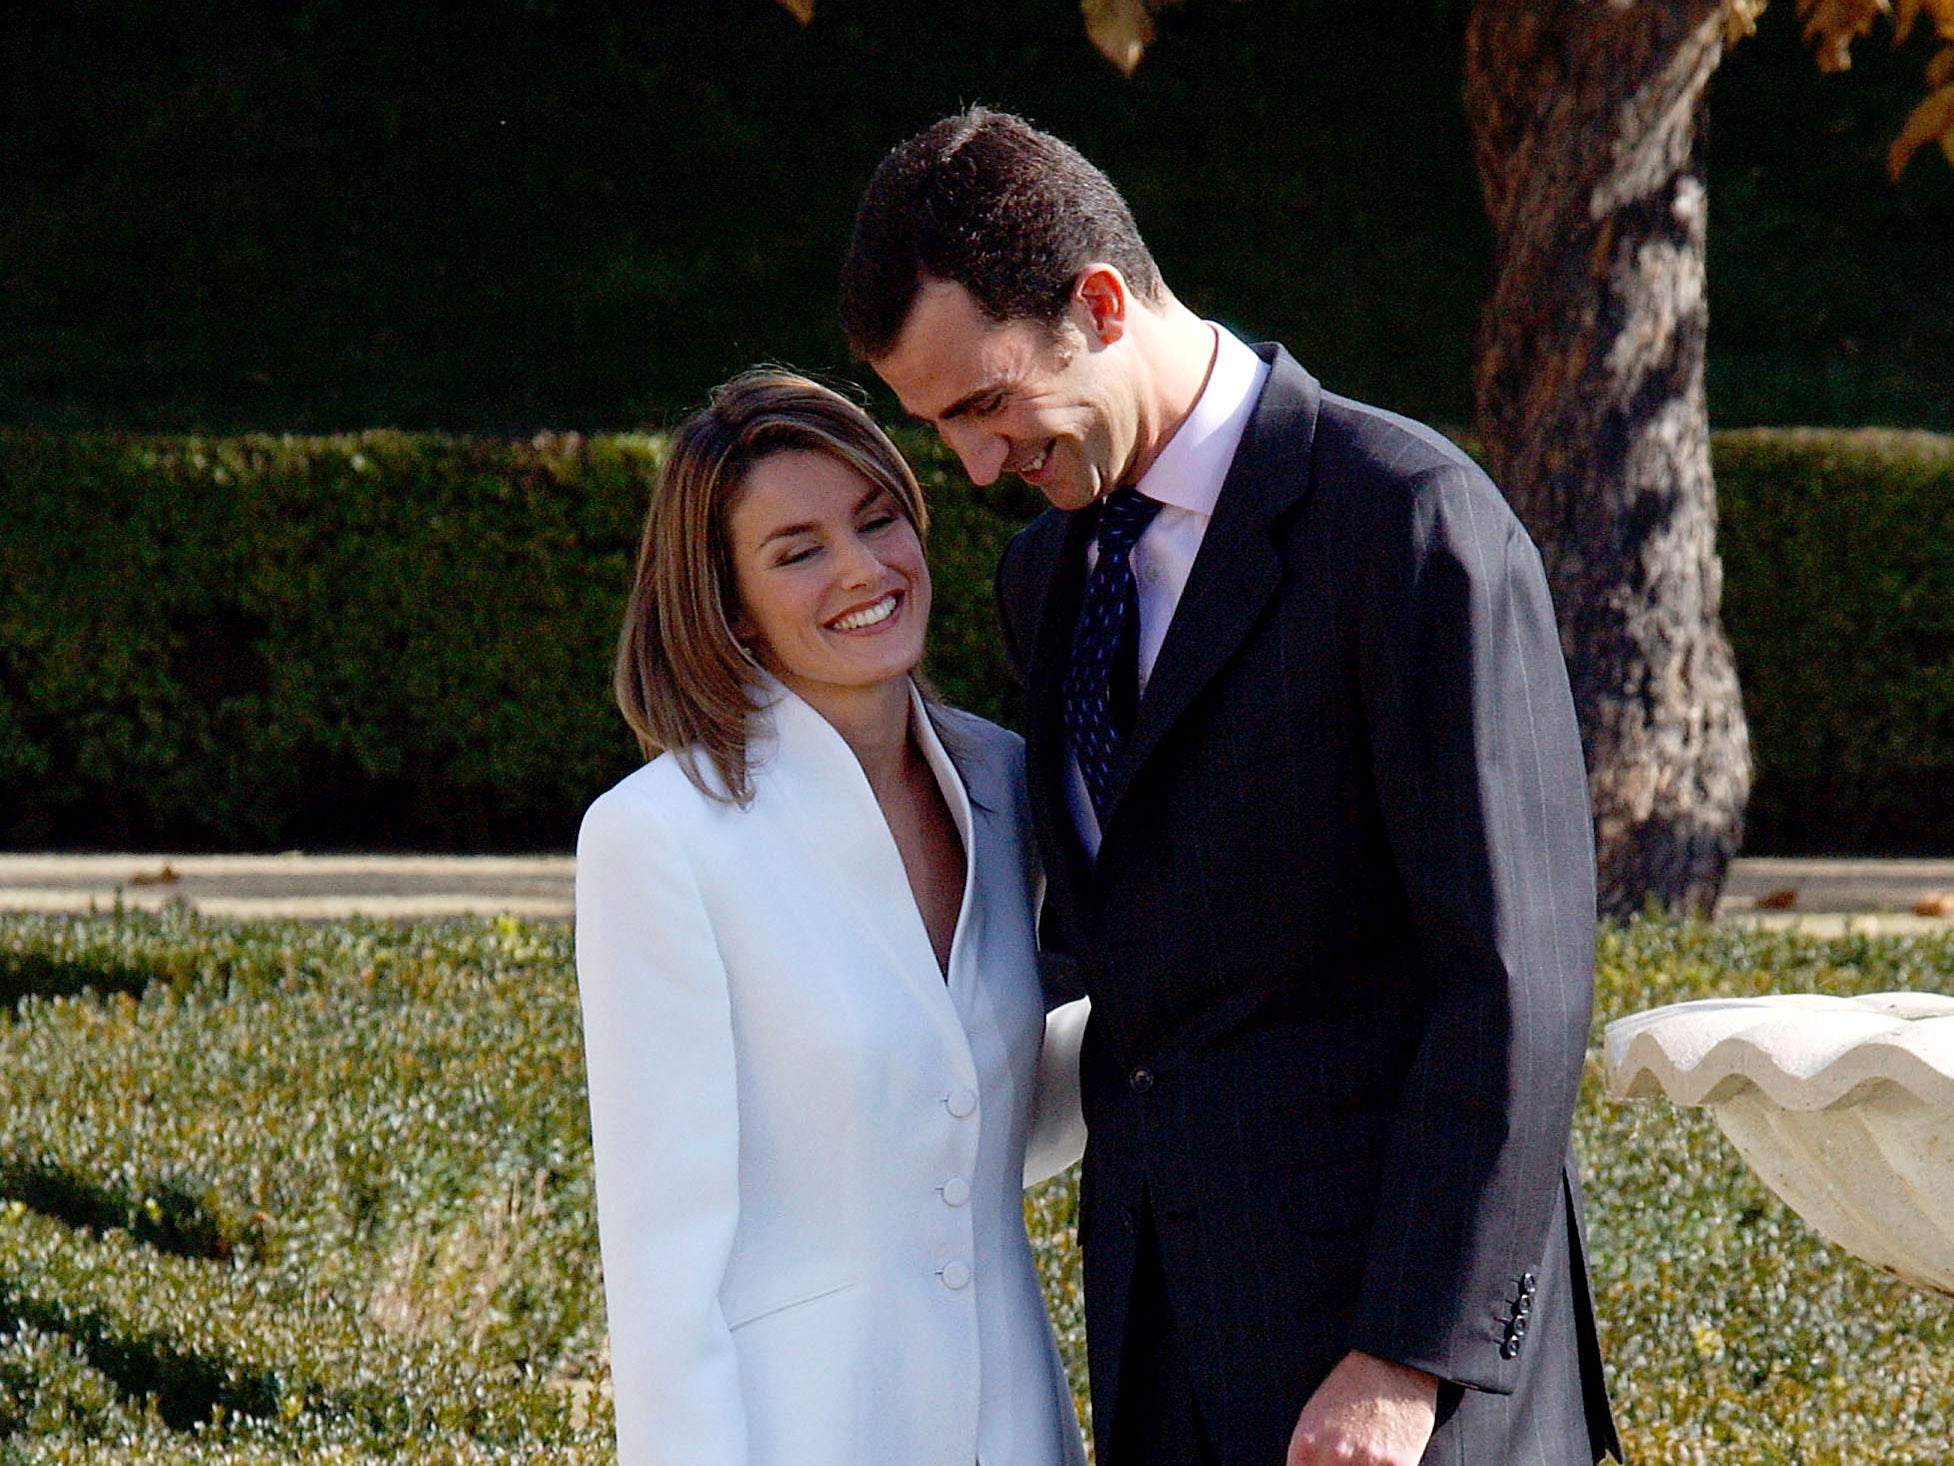 Prince Felipe and Letizia Ortiz pose during an official engagement ceremony on 6 November 2003 at Palacio del Pardo in Madrid, Spain